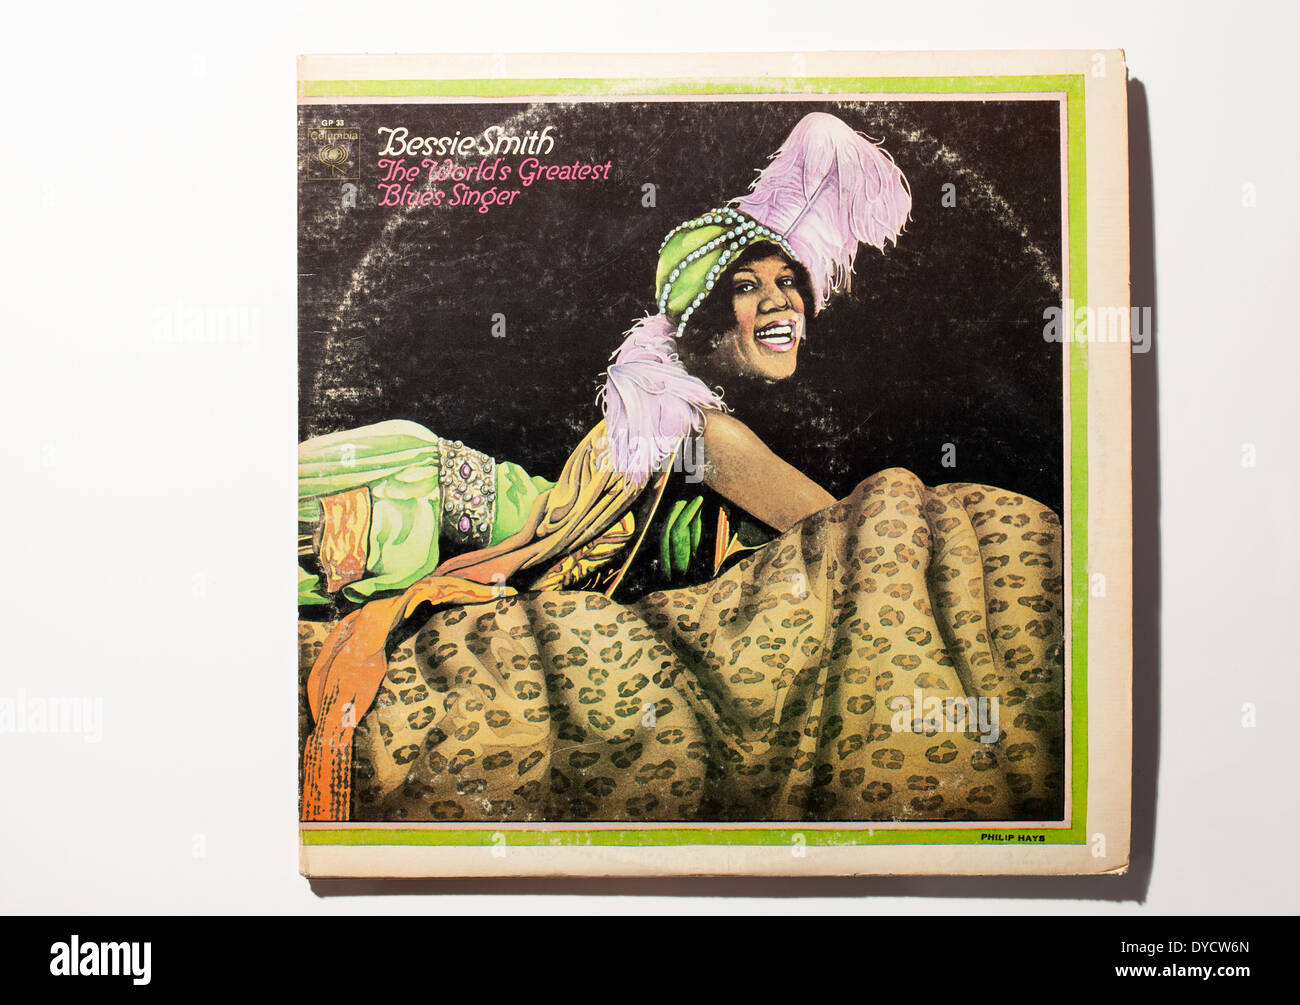 Vintage record album cover of singer music singer Bessie Smith,The World's Best Blues Singer, on Columbia Records, 1970. Stock Photo